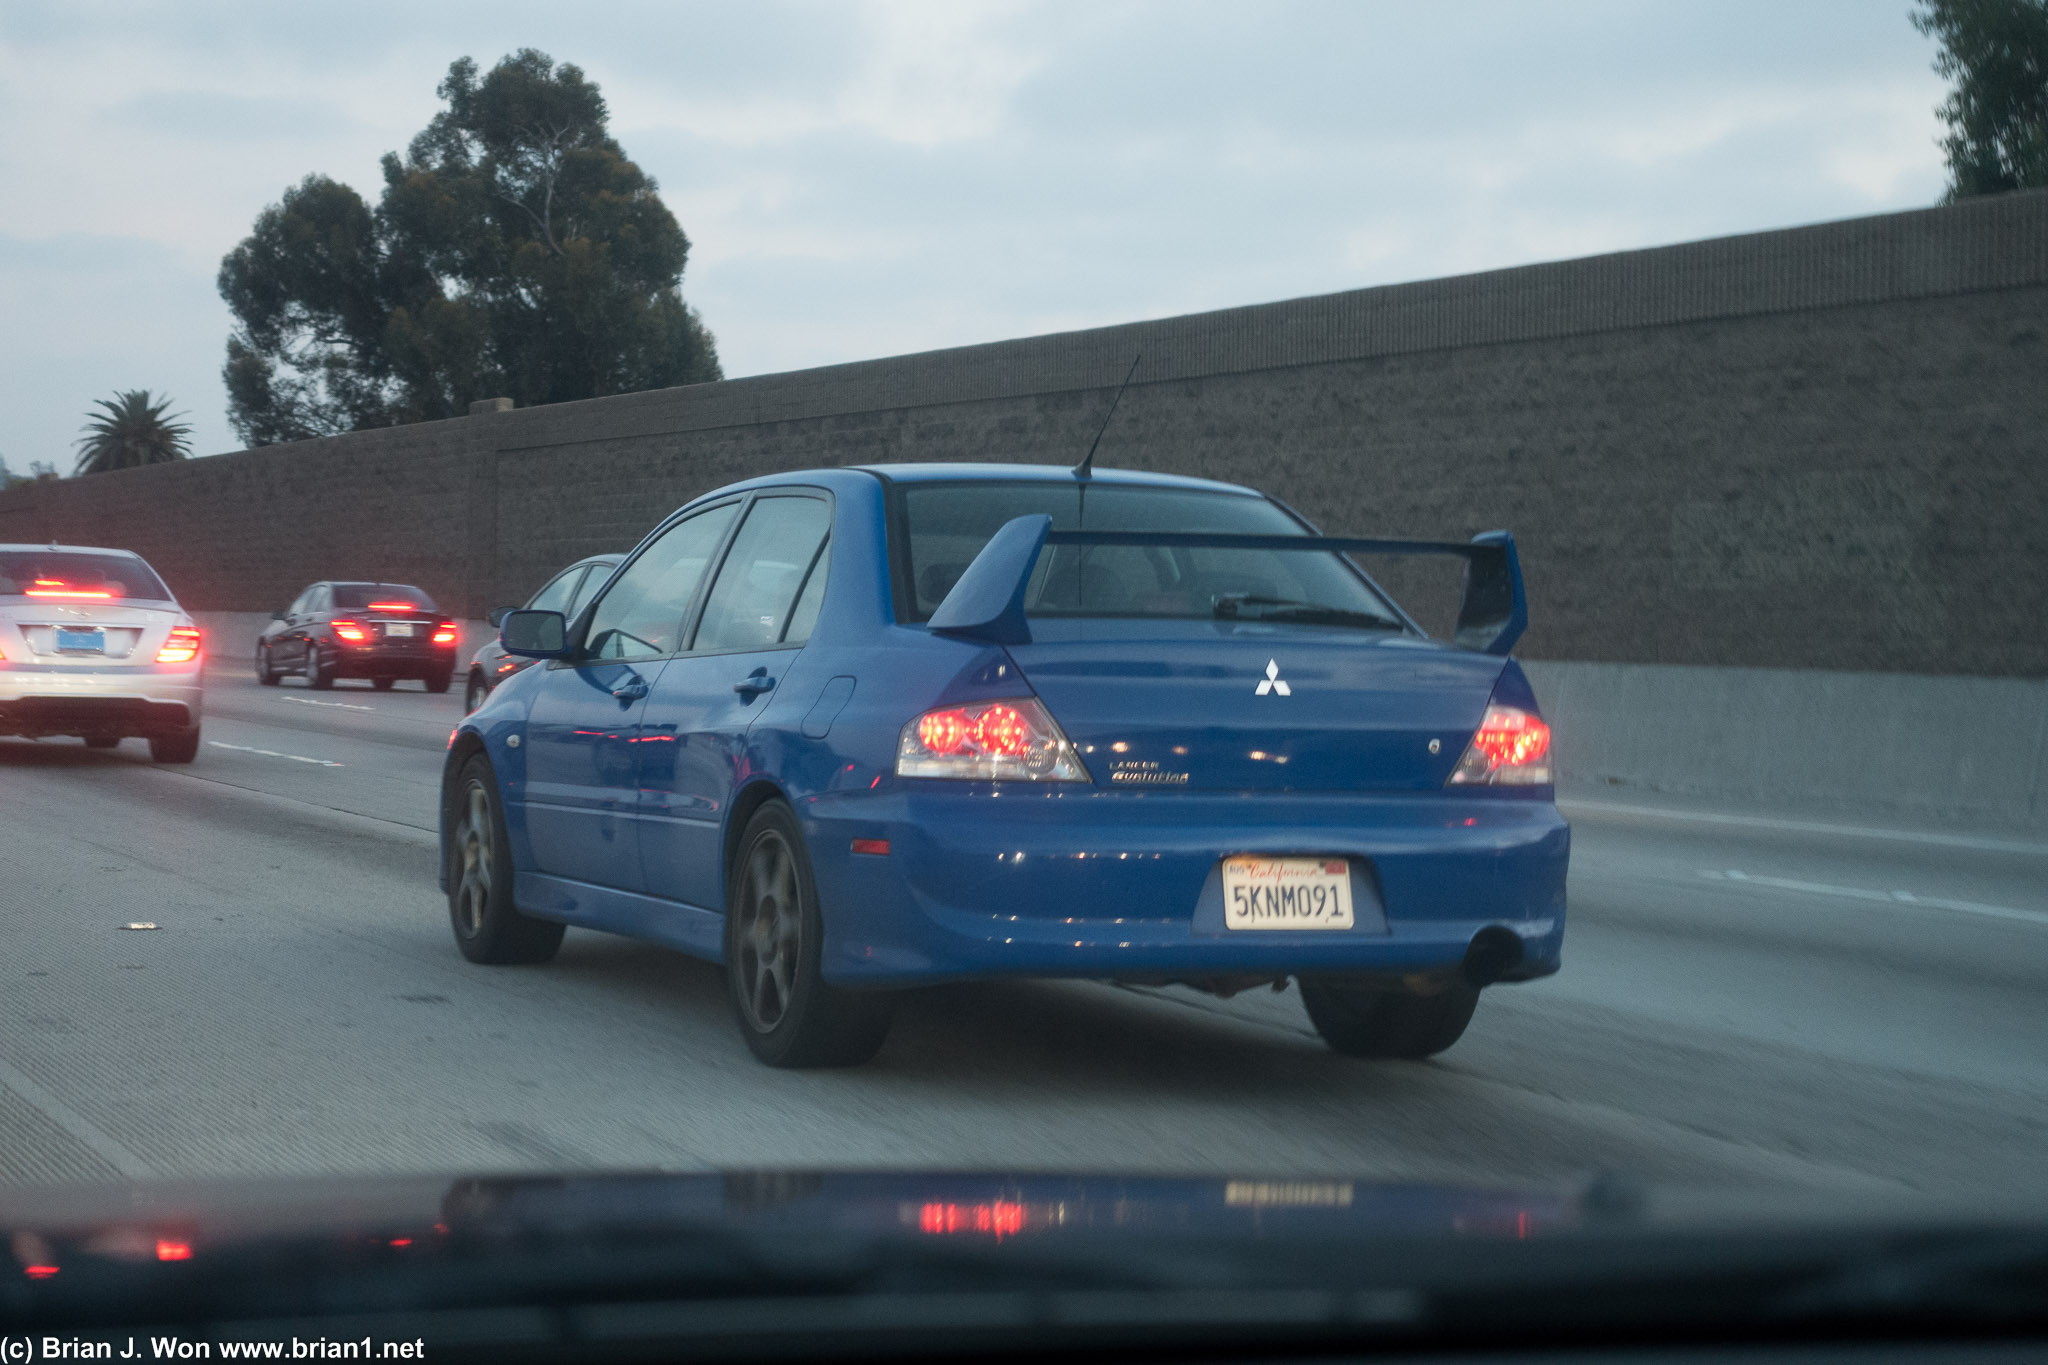 *gasp* a stock Evo 8... complete with a middle-aged white lady driving it!